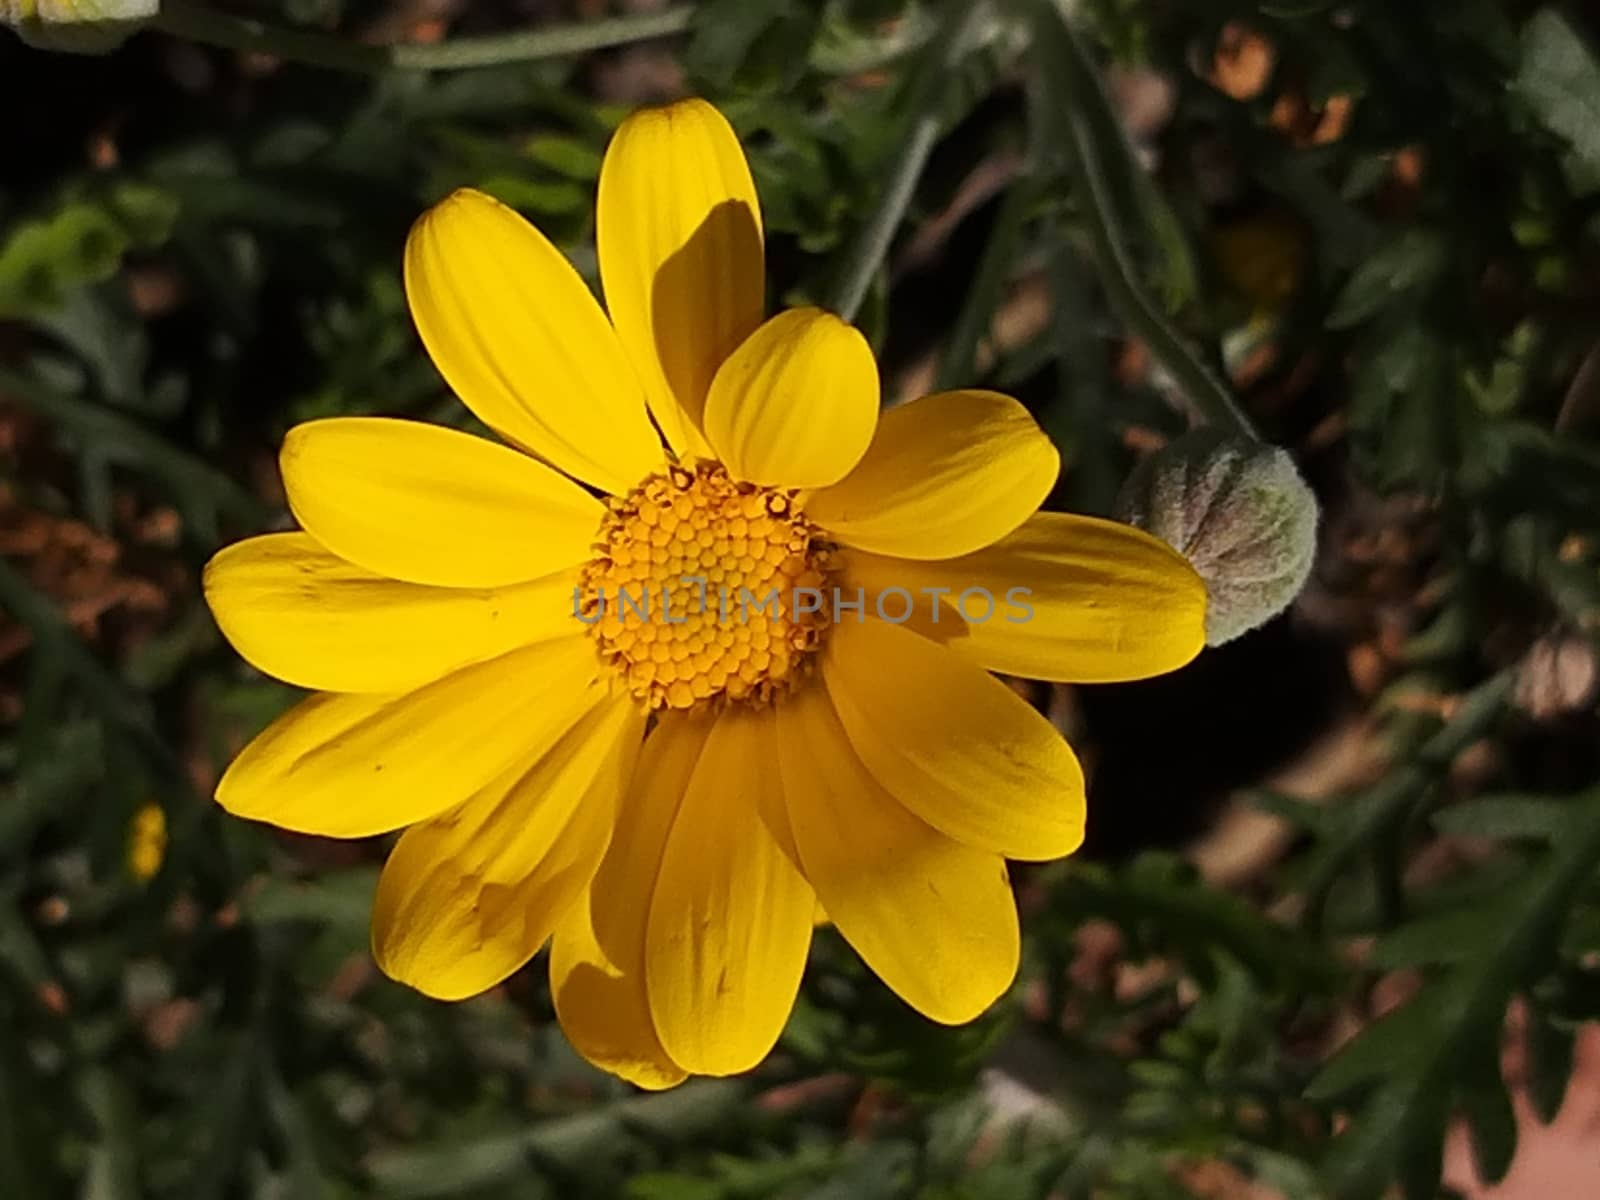 a common yellow daisy flower in the garden